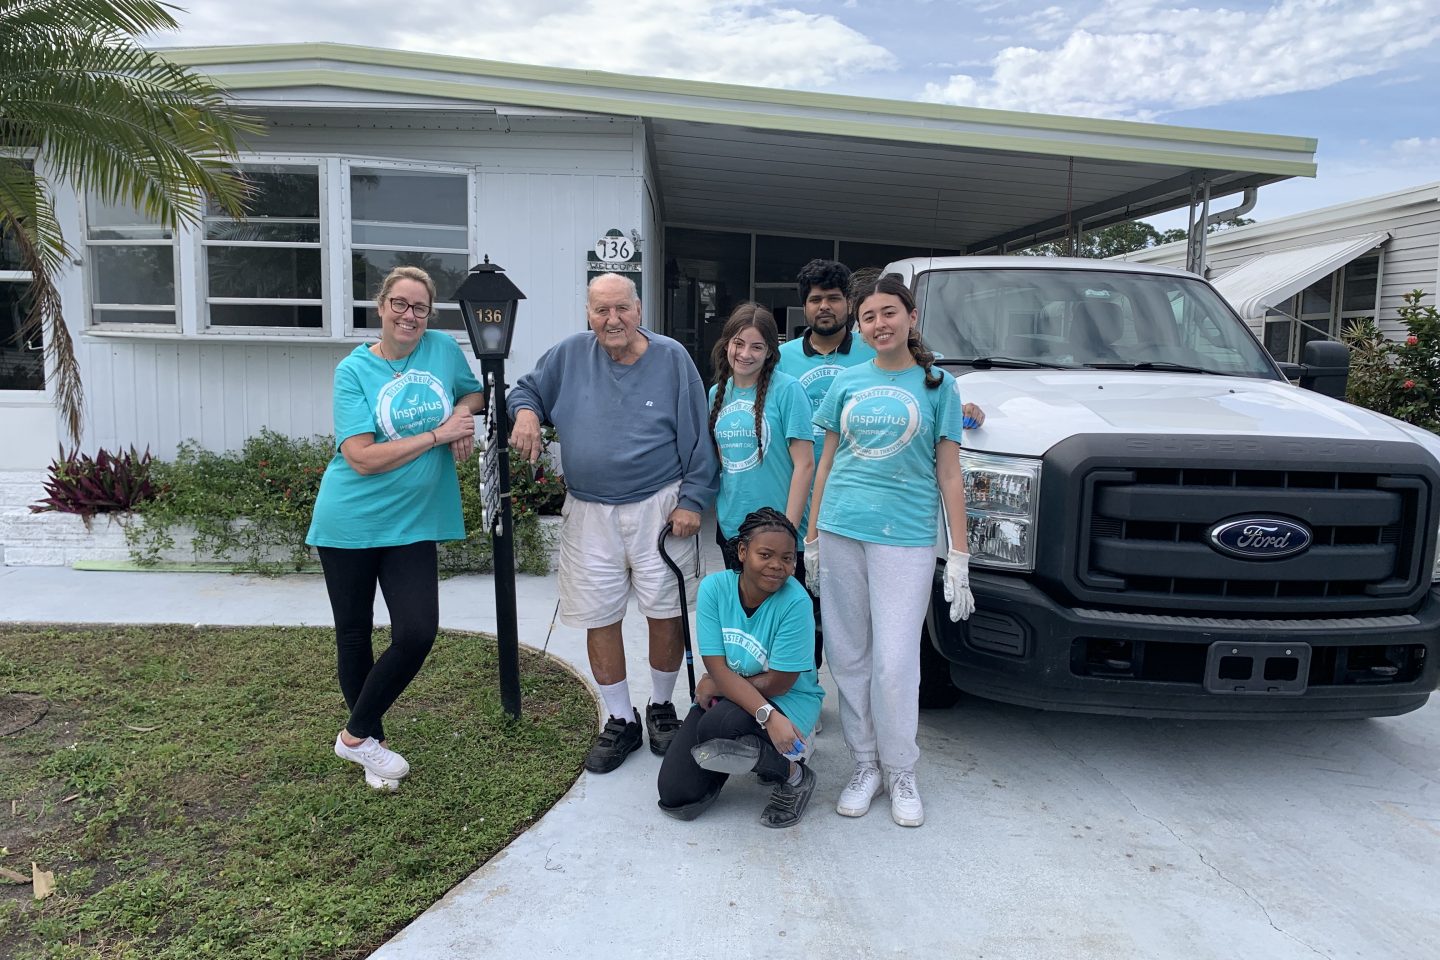 Karen Harkins (from Health Services, and the chaperone of the trip), Harold, Linda Titone, Vishal Gandham, Zakhro Kakhramonova, and Lyn Abby Bigord take a photo outside of Harold's home. The students spent the week repairing his home that was damaged from various hurricanes in Fort Myers, FL.